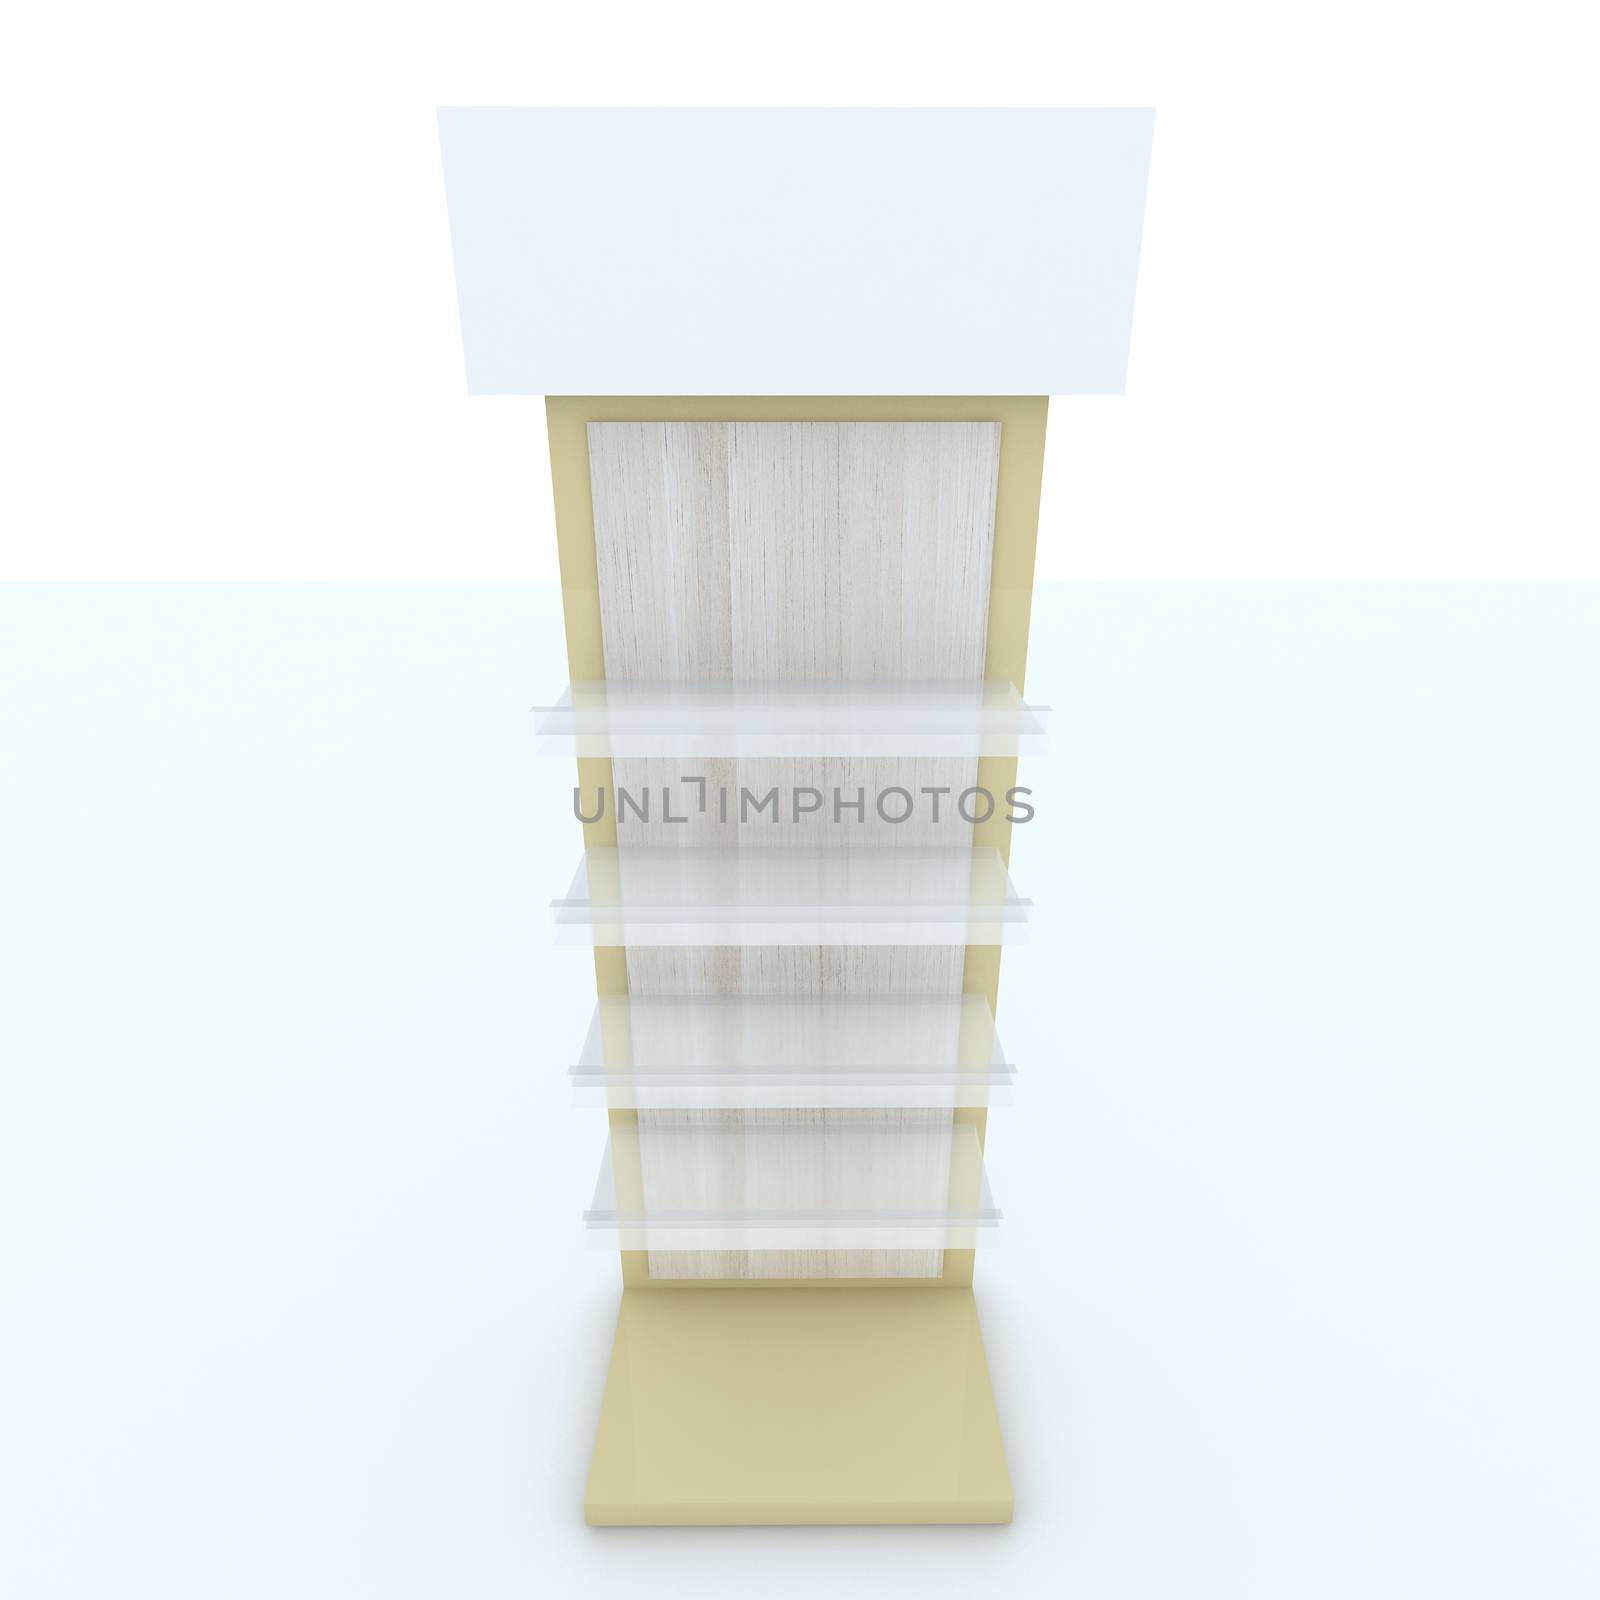 Color yellow shelf design on white background.